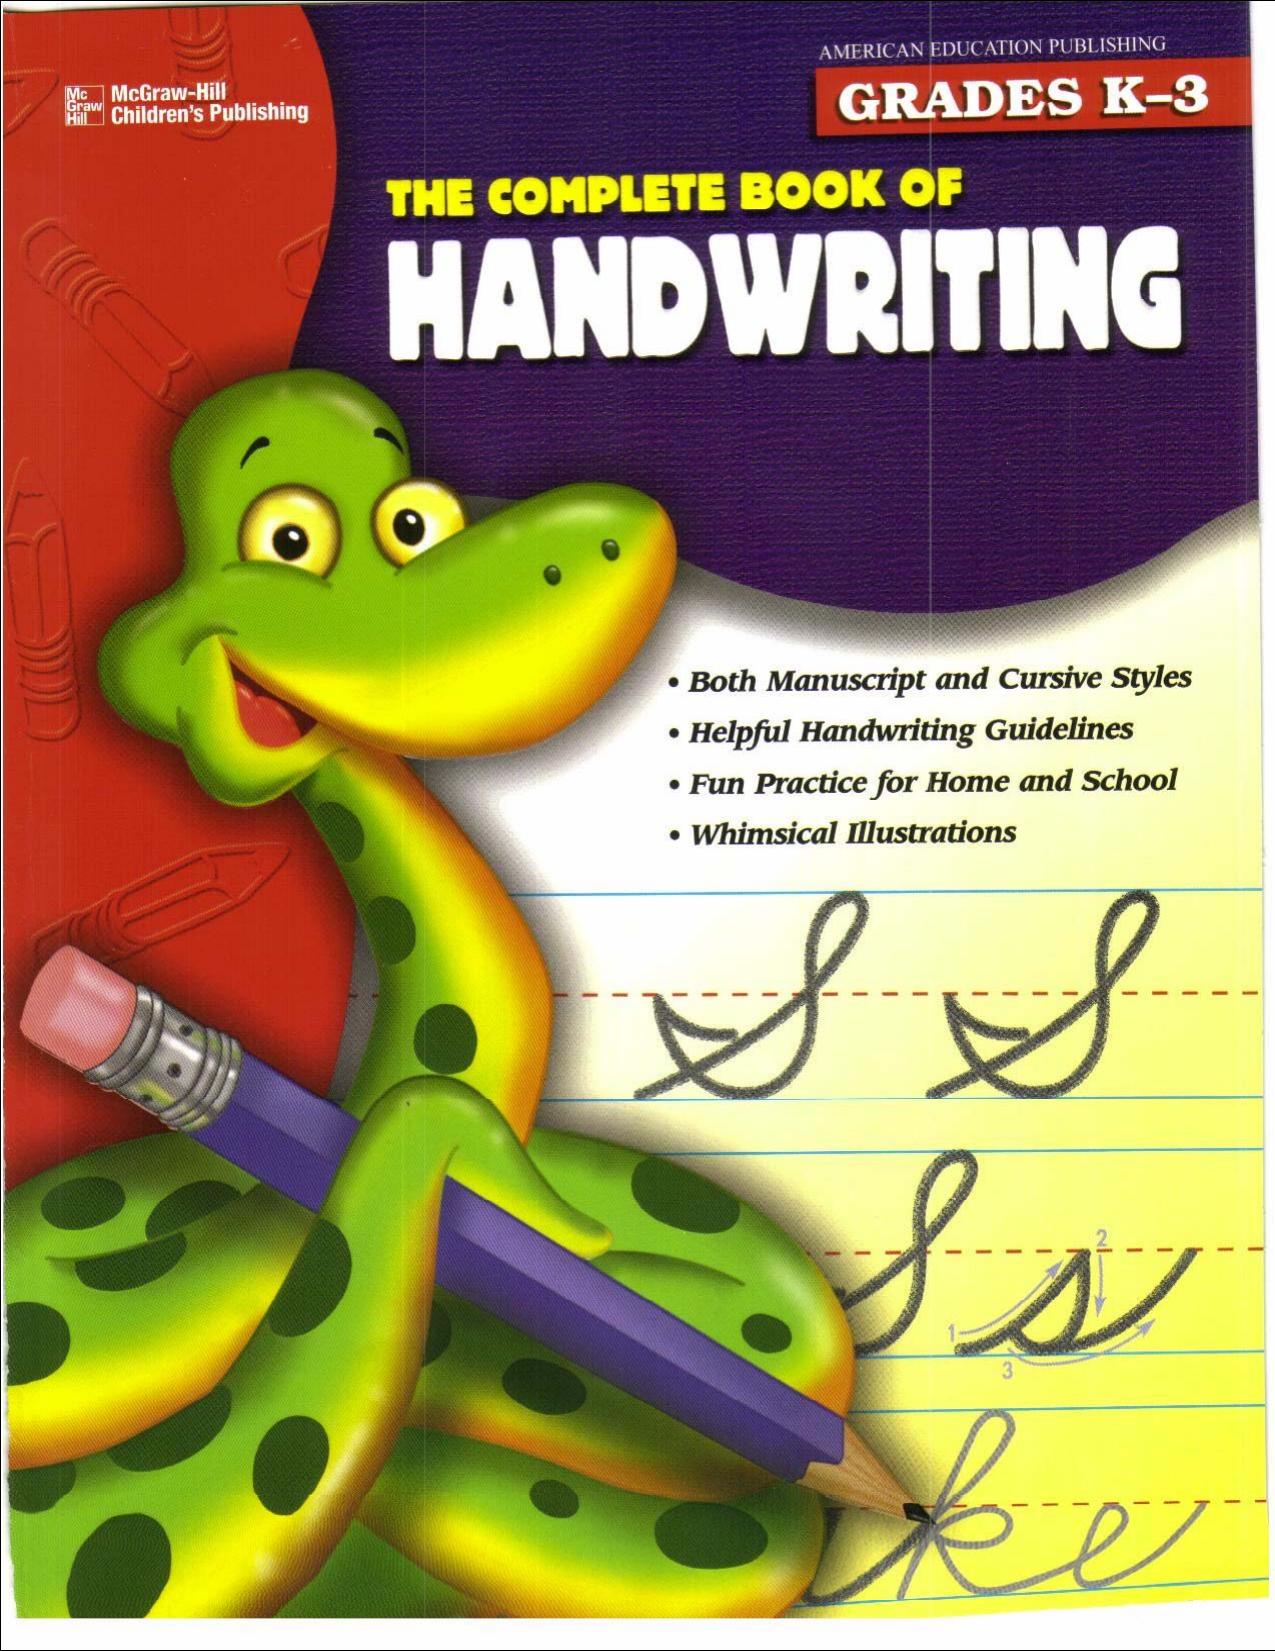 The Complete Book of Handwriting by School Specialty Publishing